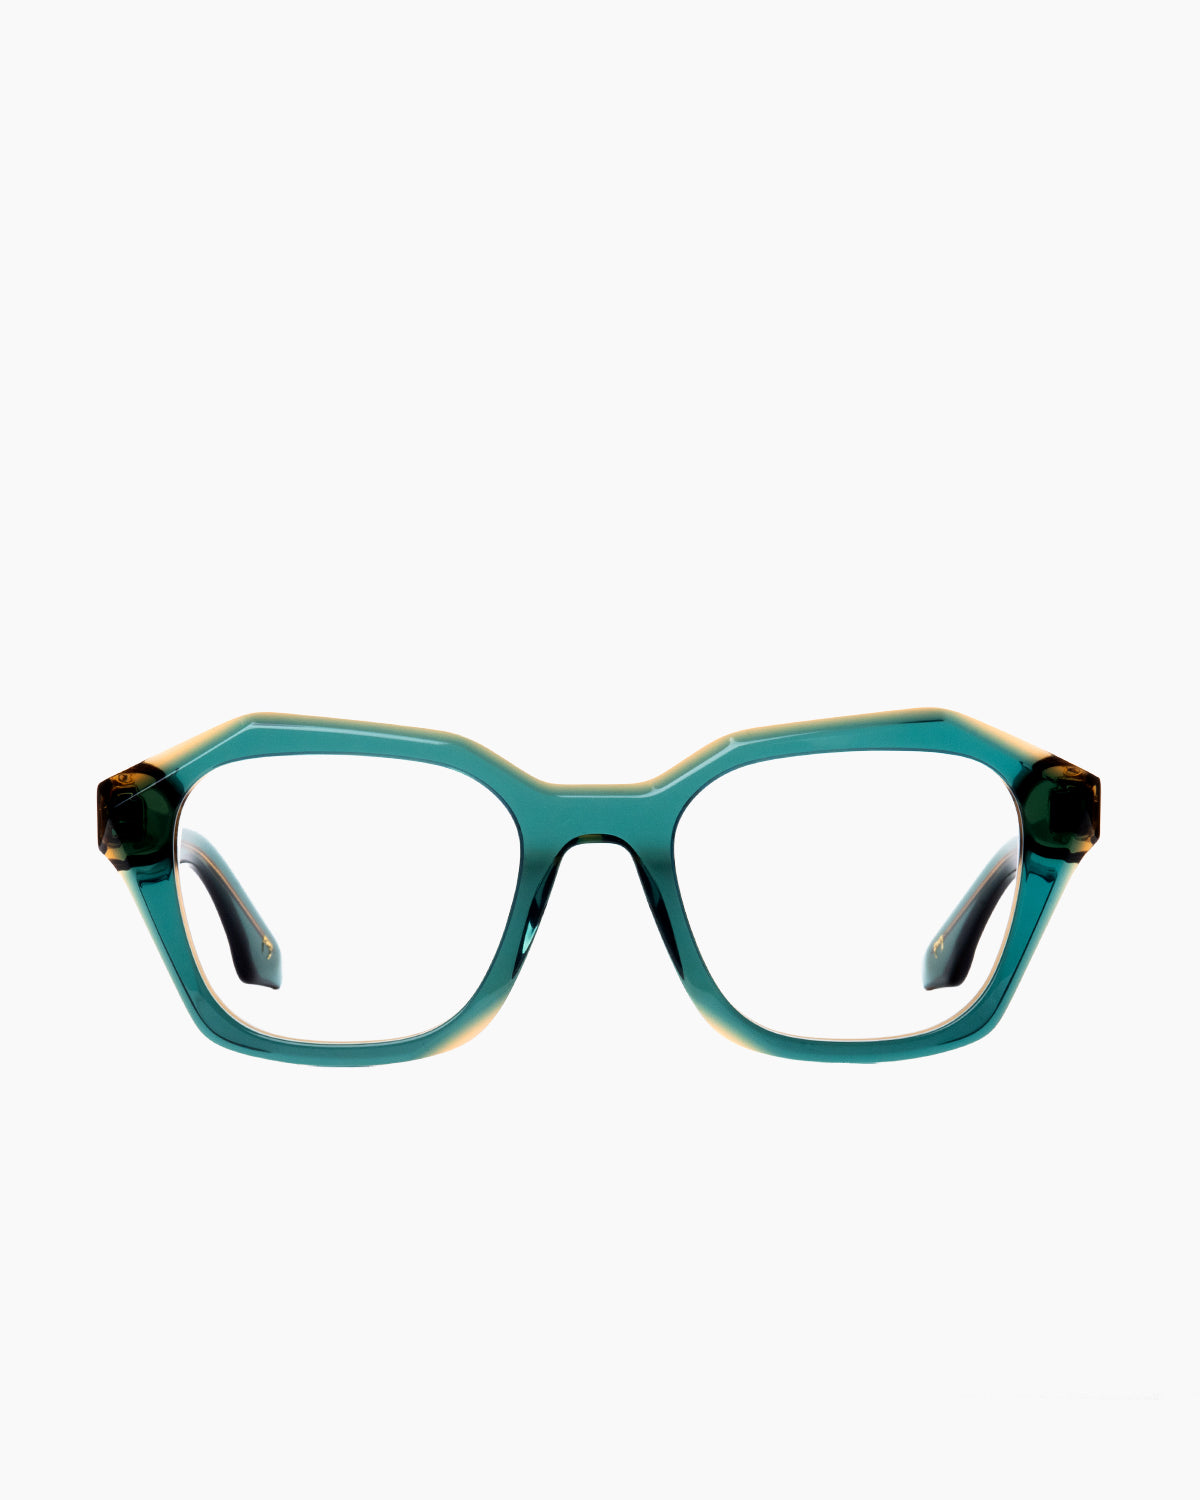 Spectacleeyeworks - Nada - c736 | Bar à lunettes:  Marie-Sophie Dion